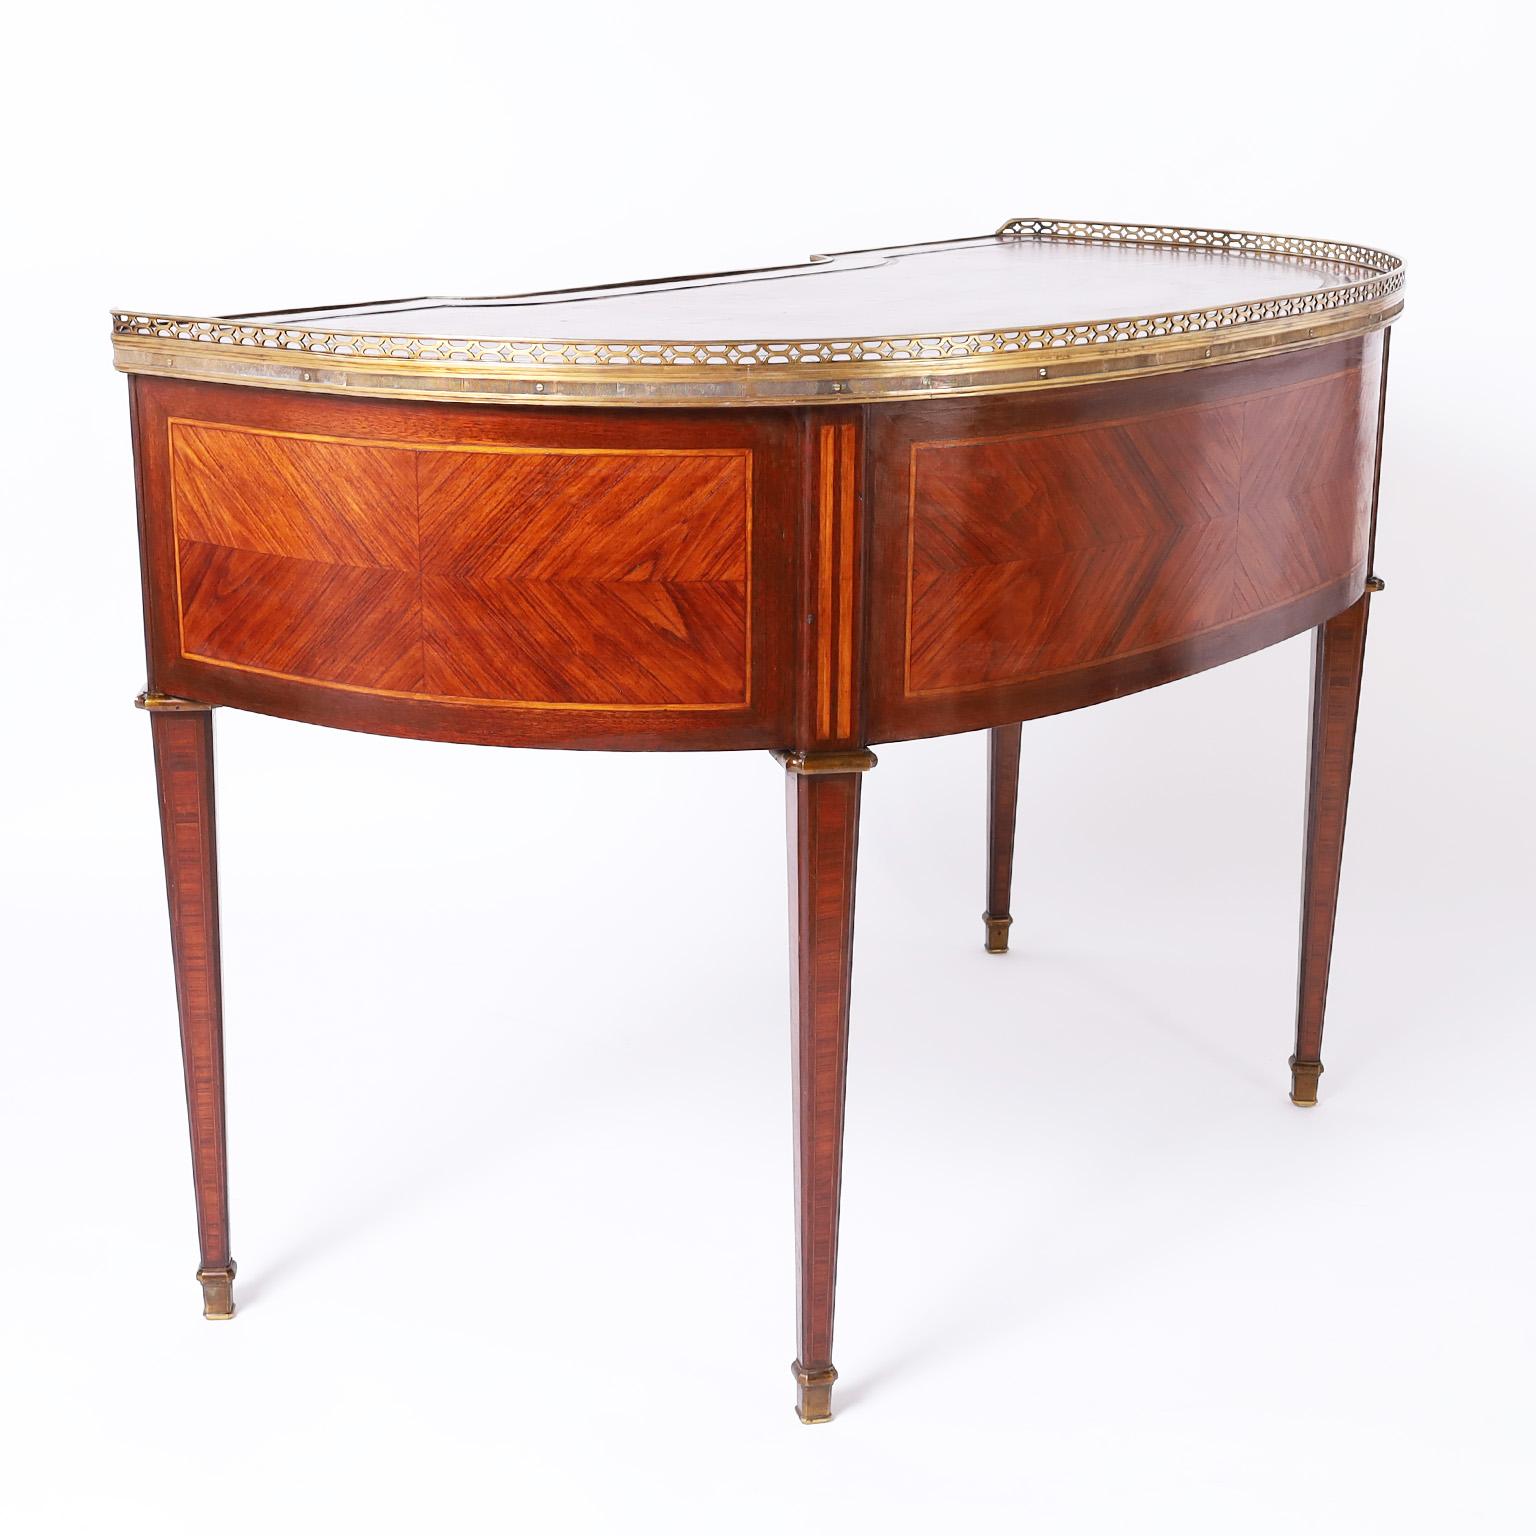 Inlay Antique Louis XVI Style French Demi Lune Leather Top Desk For Sale